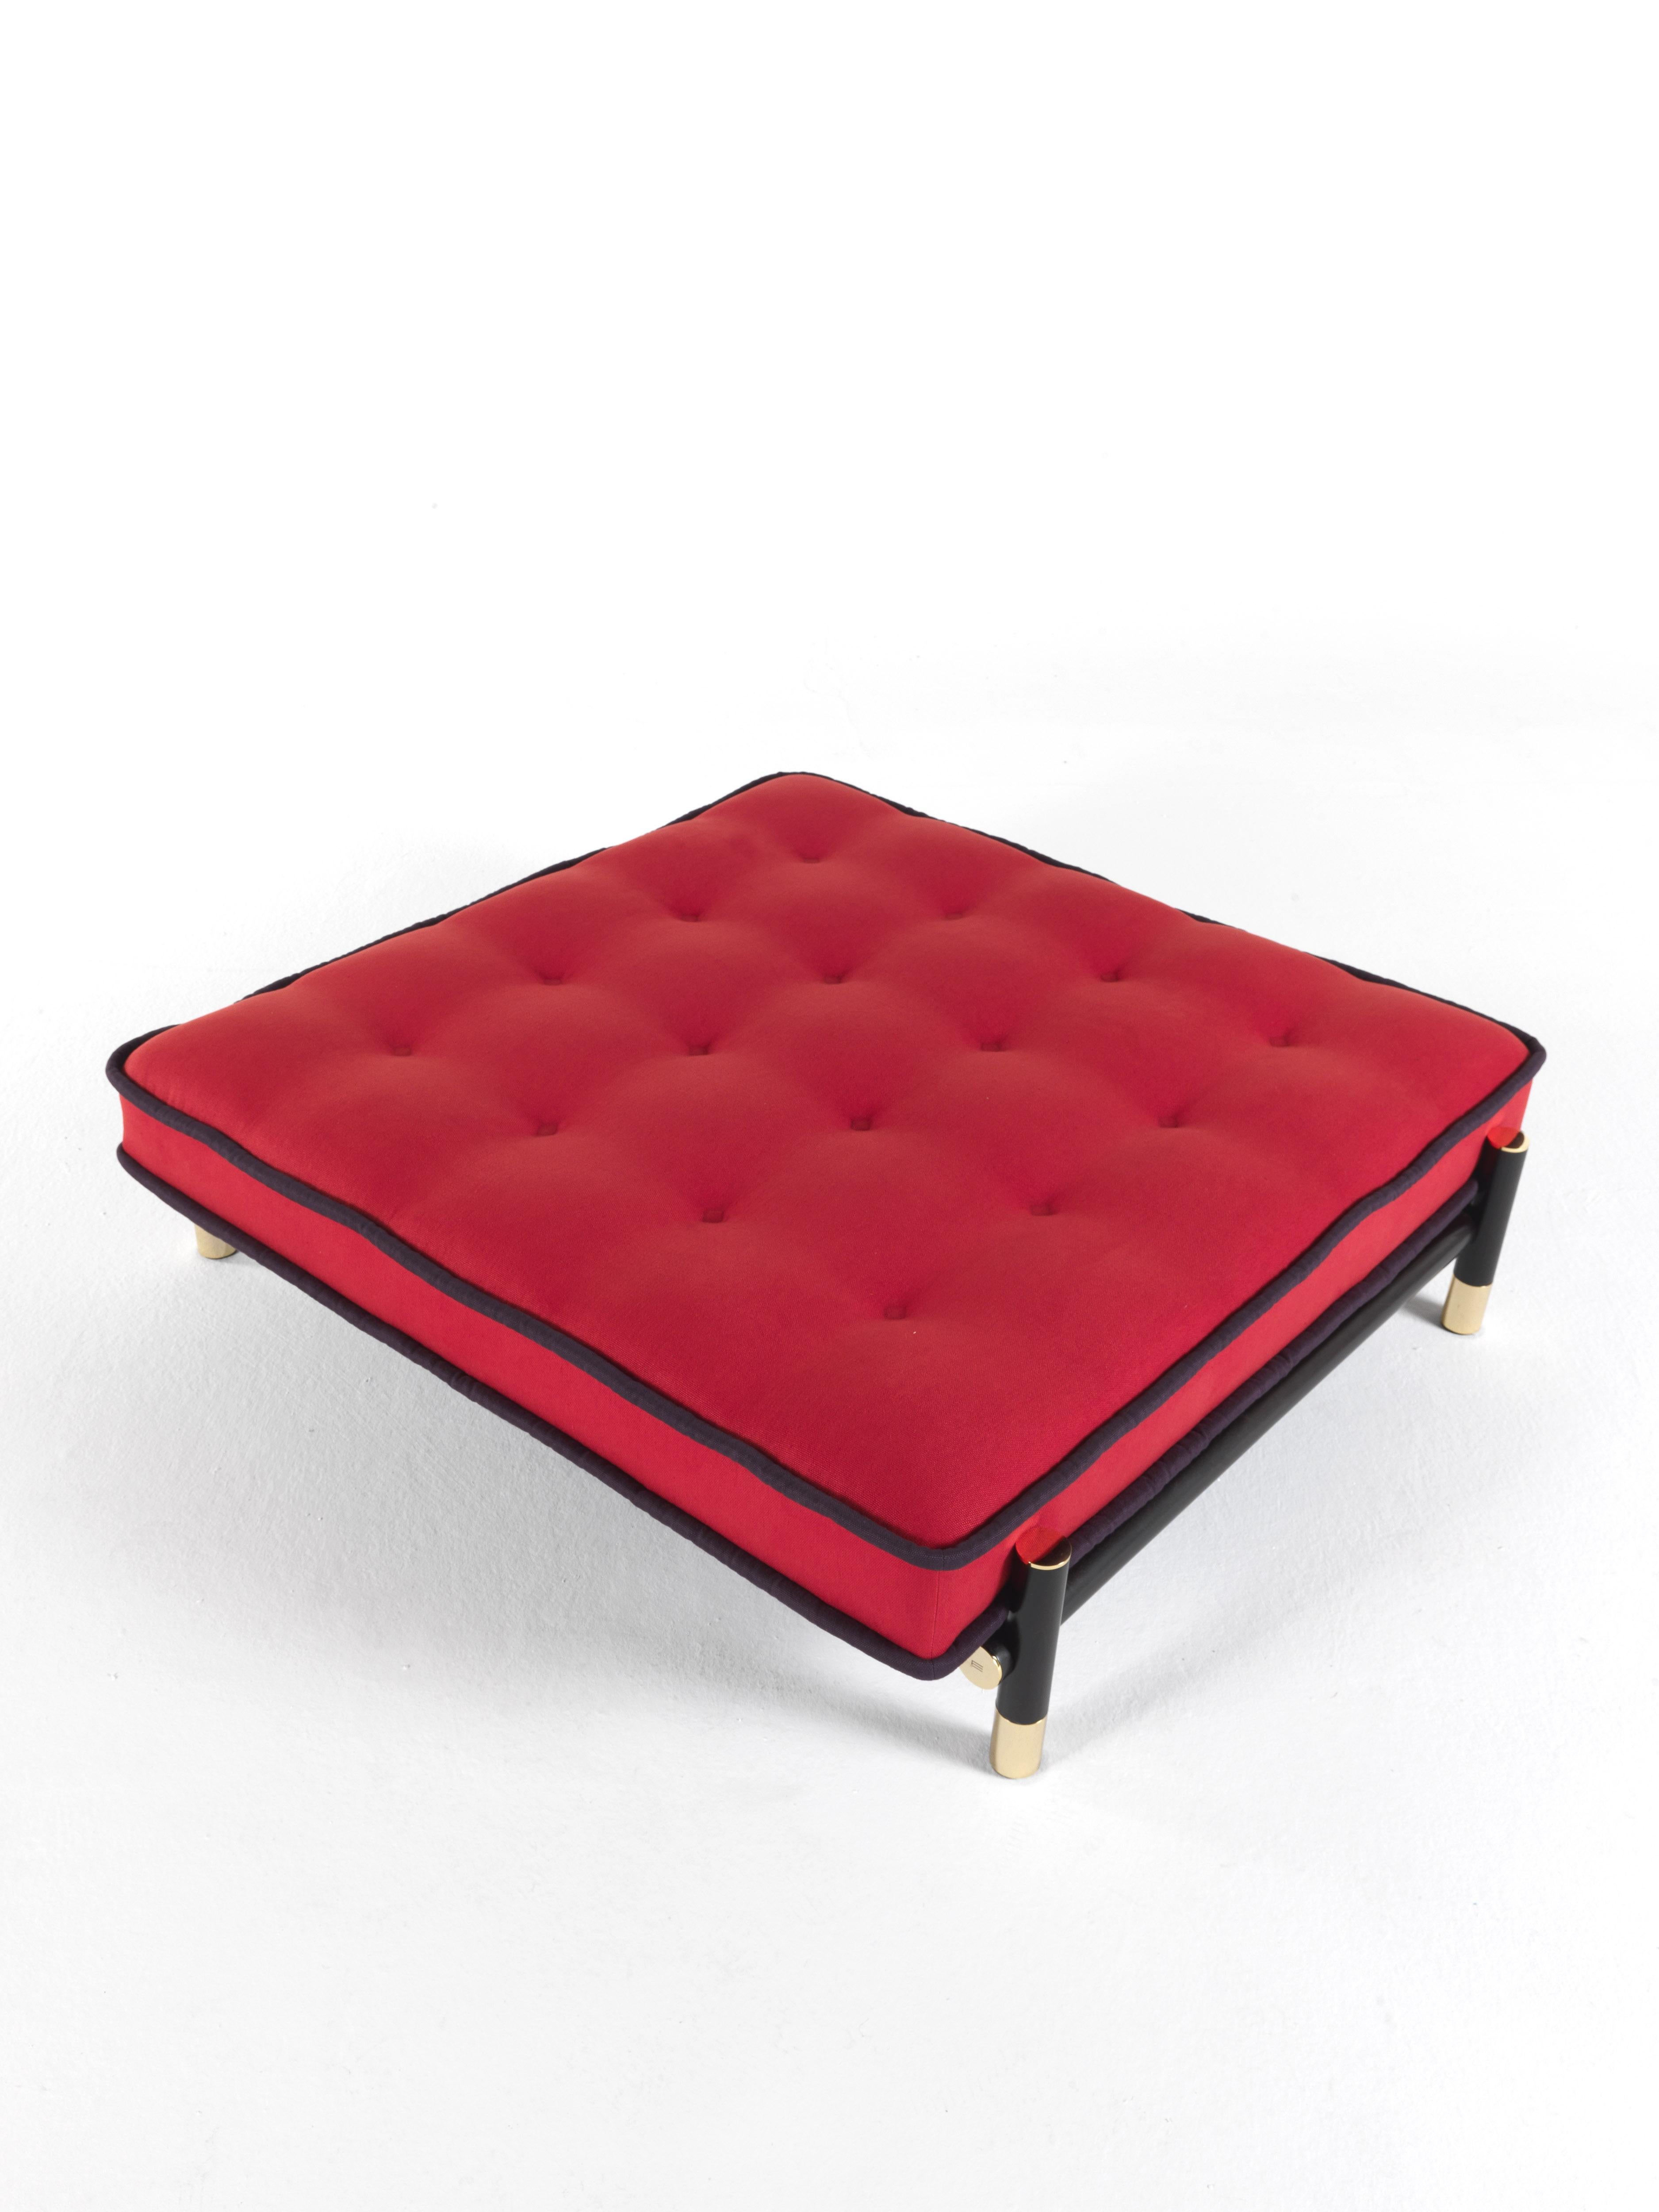 Modern 21st Century Woodstock Pouf in Red Fabric by Etro Home Interiors